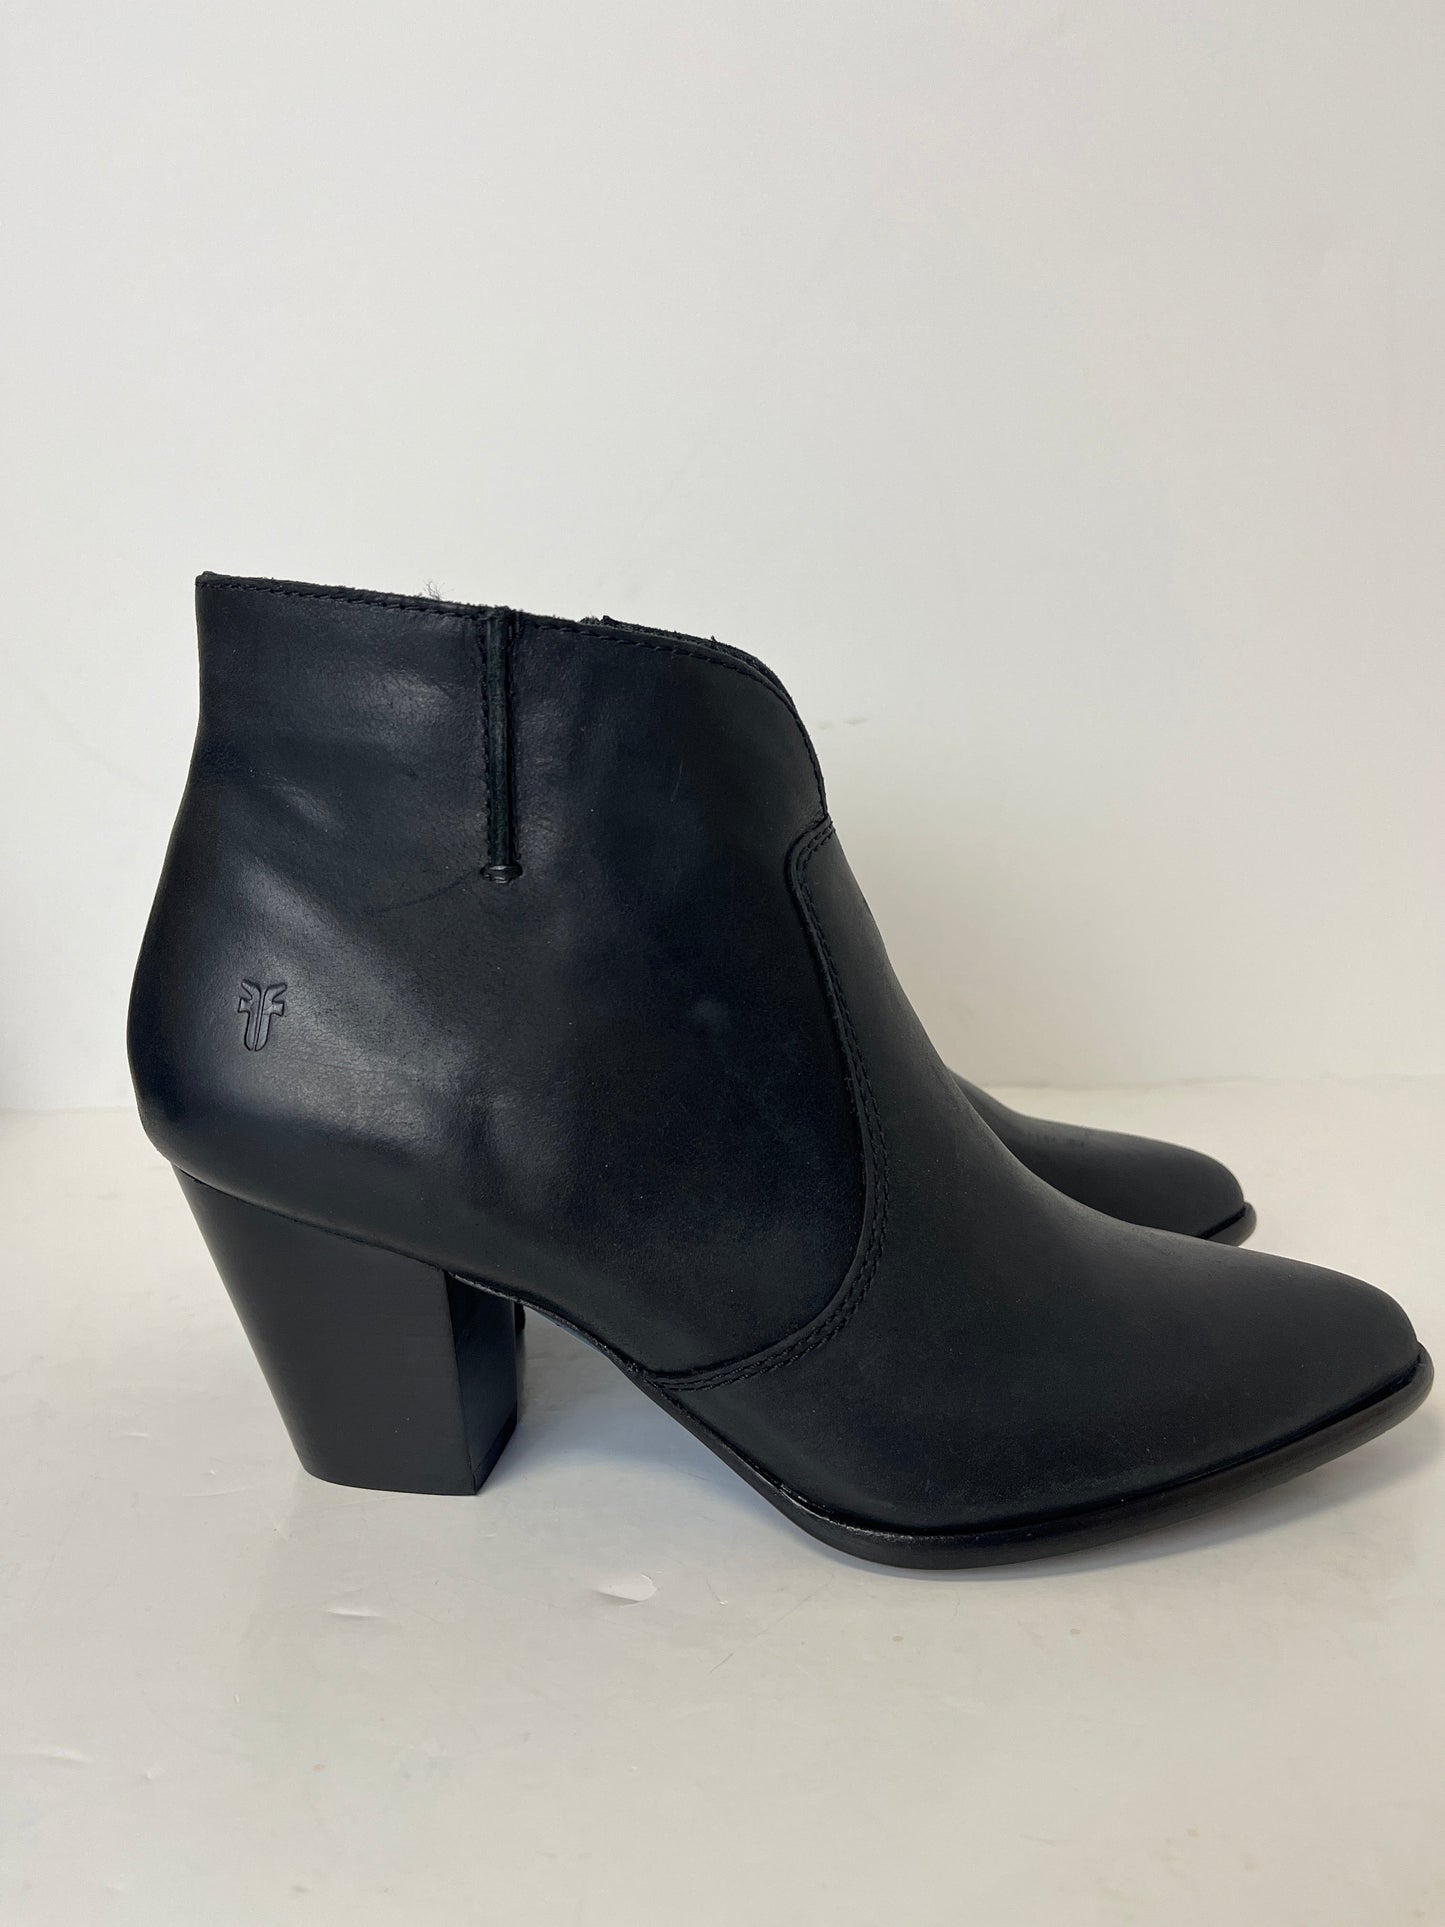 Boots Ankle Heels By Frye  Size: 7.5